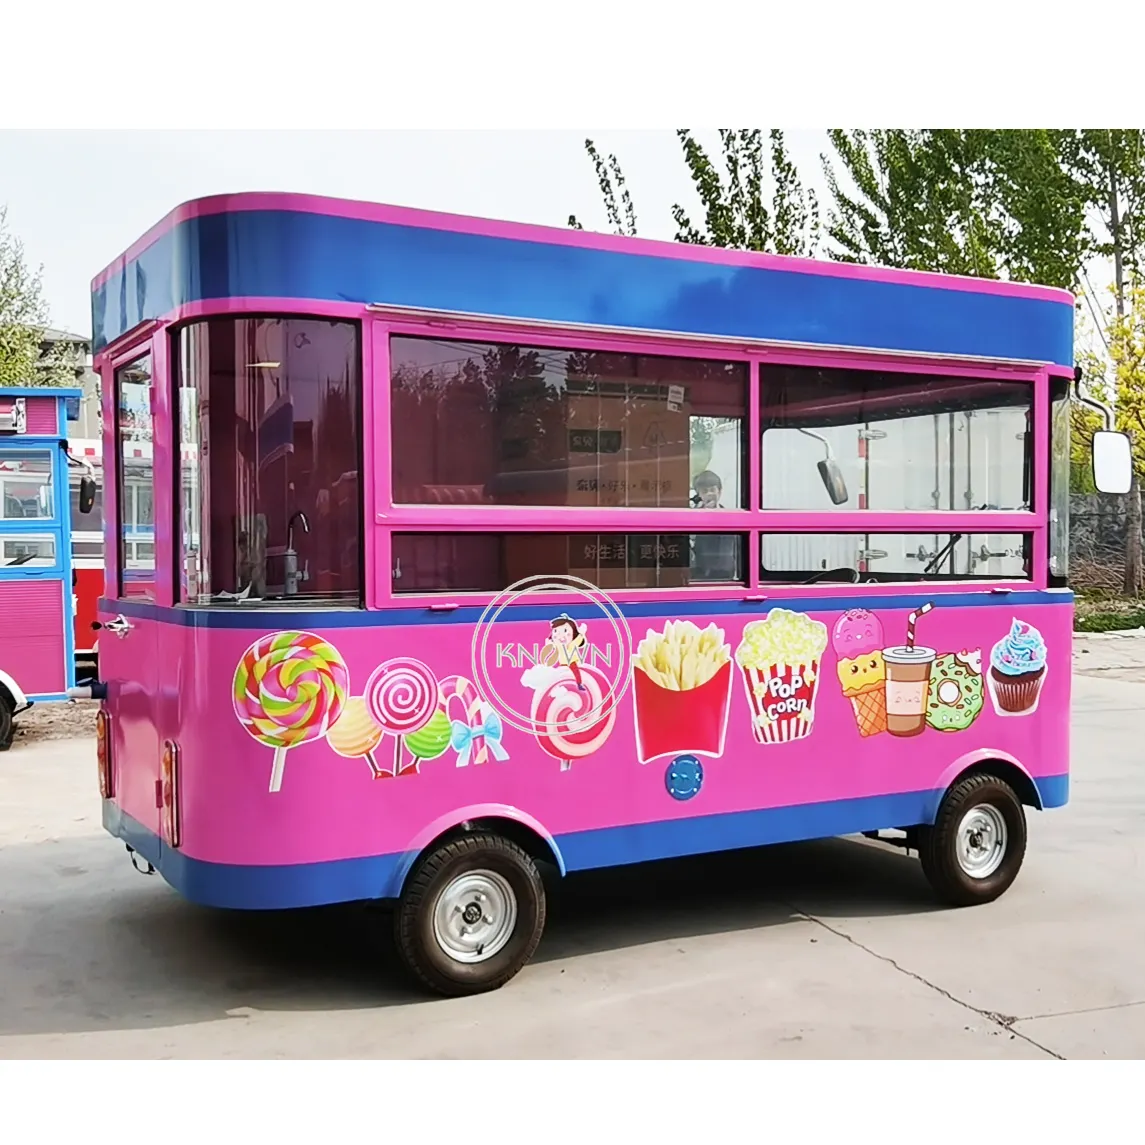 CE DOT Approved Electric Food Truck for Sale Fashionable Mobile Street Kitchen Food Cart Customized Catering Vending Kiosk